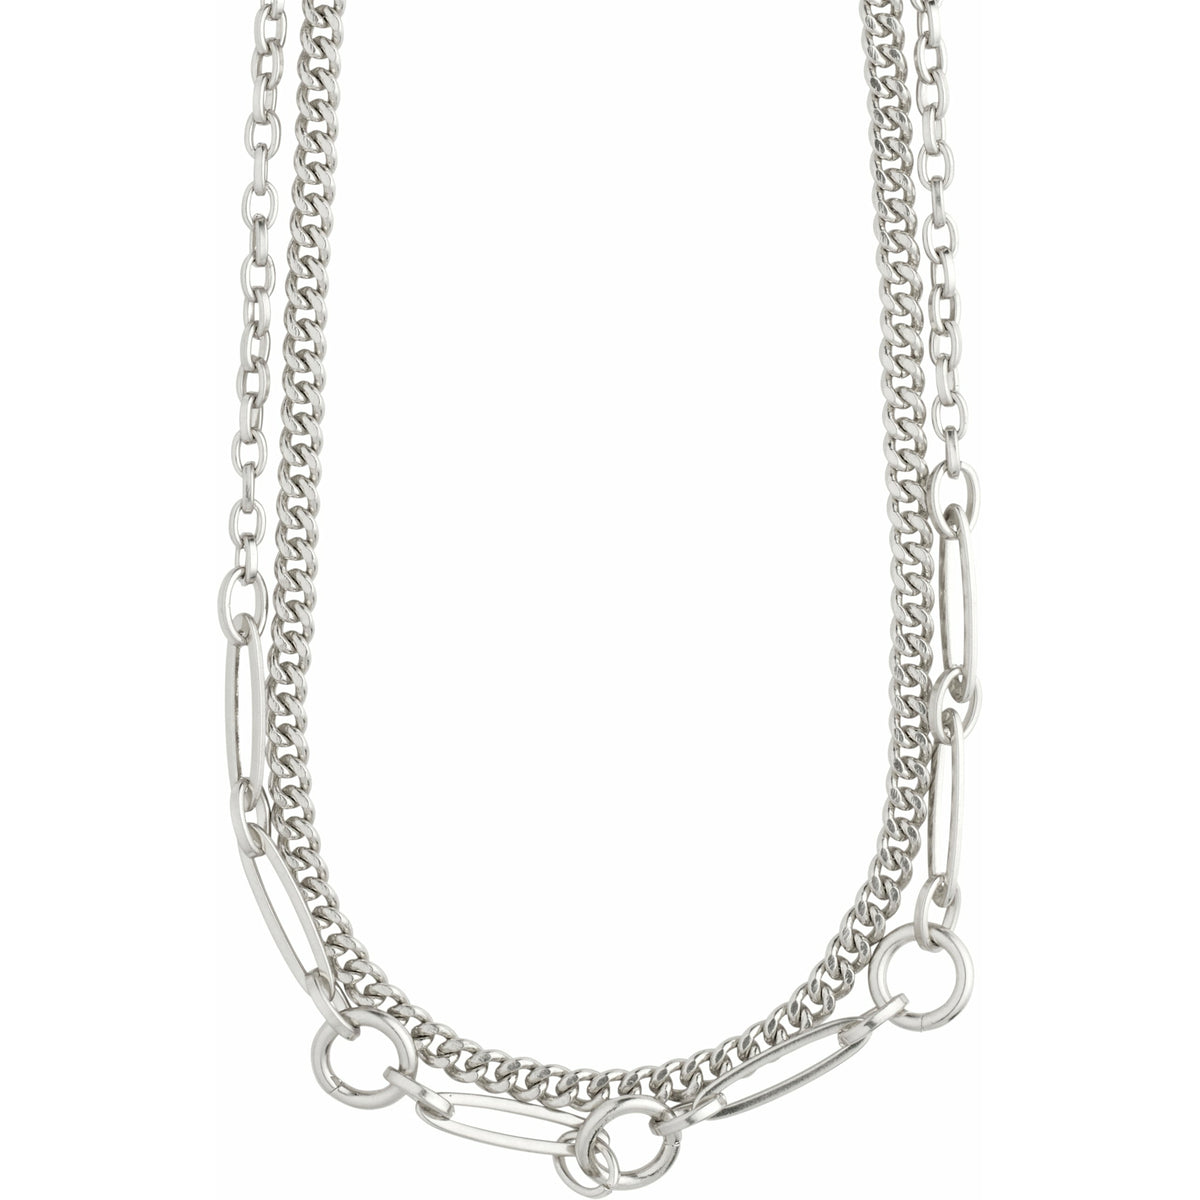 Can&#39;t go wrong with this 2-in-1 set! The curb link chain layers perfectly with the unique open work, edgy chain design, special to Pilgrim.   Handmade with heart.  Danish design.   silver plated.  More information: - Curb link chain measures 48cm in length. - Open work chain measures 50cm in length